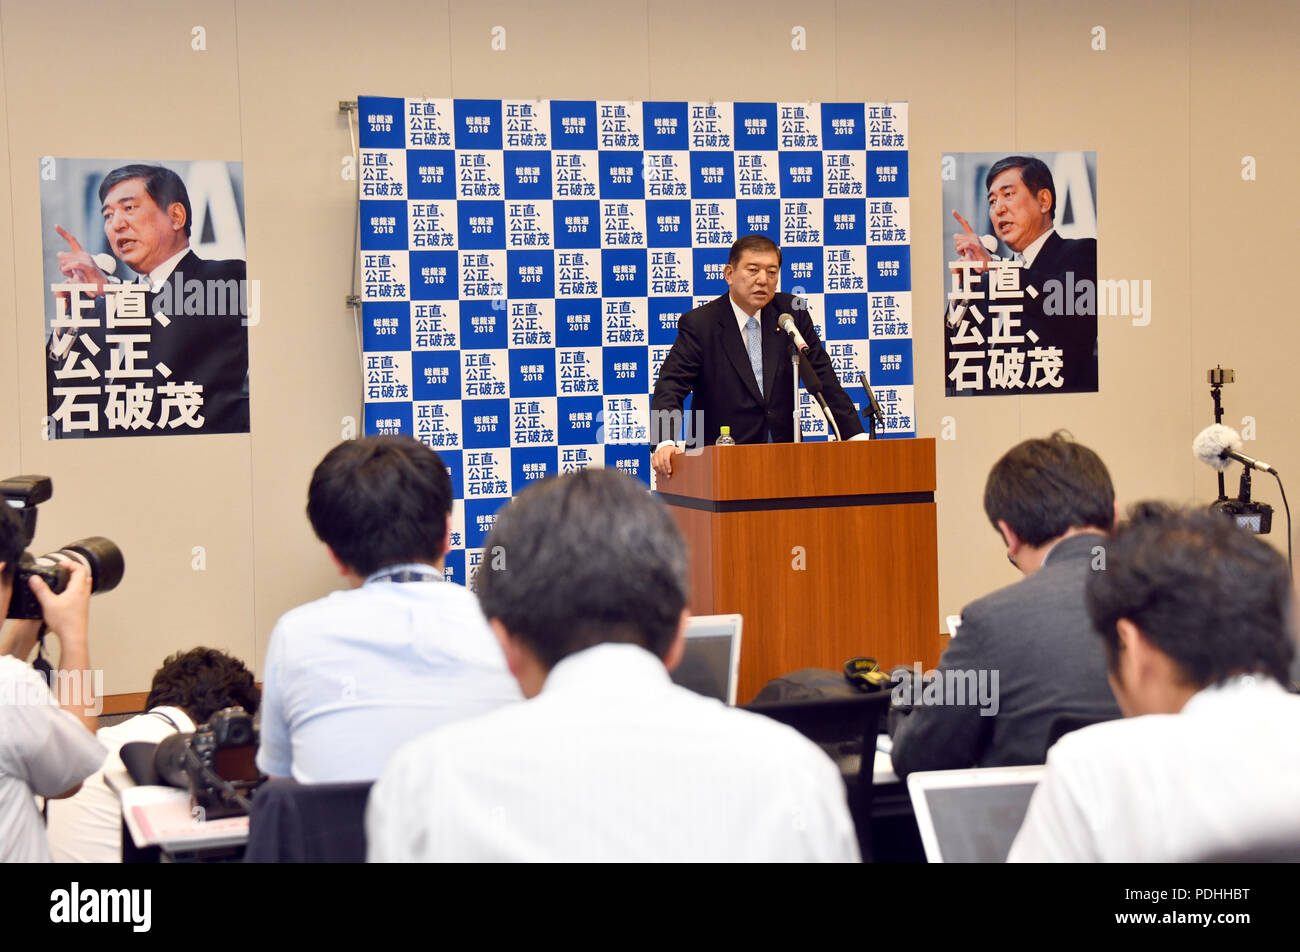 Tokyo, Japan. 10th Aug, 2018. Shigeru Ishiba, a veteran lawmaker of Japans ruling Liberal Democratic Party, announces his candidacy in the September election for the party presidency during a news conference in Tokyo on Friday, August 10, 2018. Japans Prime Minister and incumbent LDP President Shinzo Abe has made it known that he would run for a third 3-year term as party president. Credit: Natsuki Sakai/AFLO/Alamy Live News Stock Photo